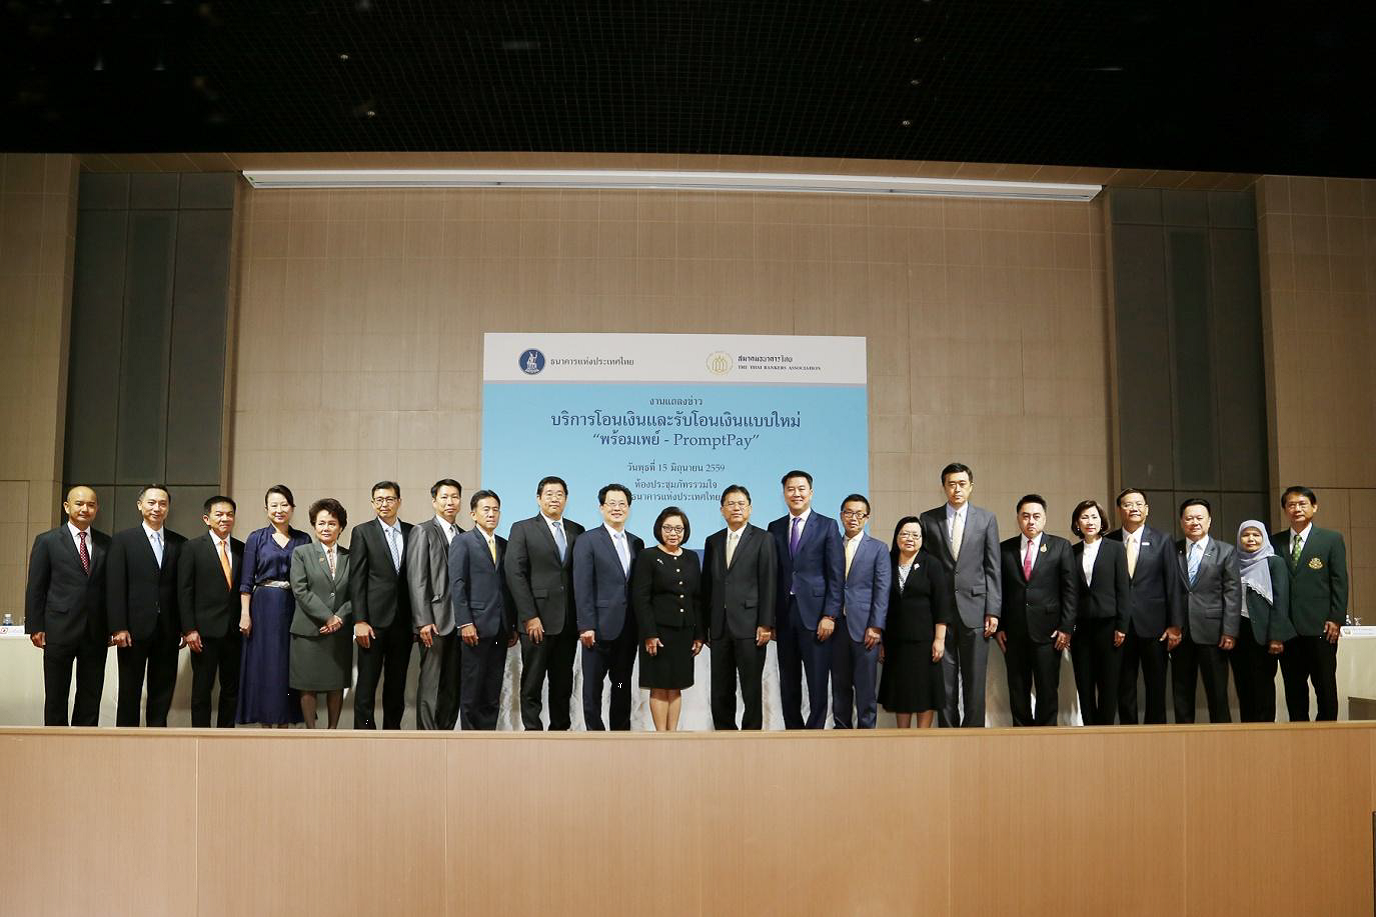 EXIM Thailand Joins the Press Conference of National E-payment System “PromptPay”